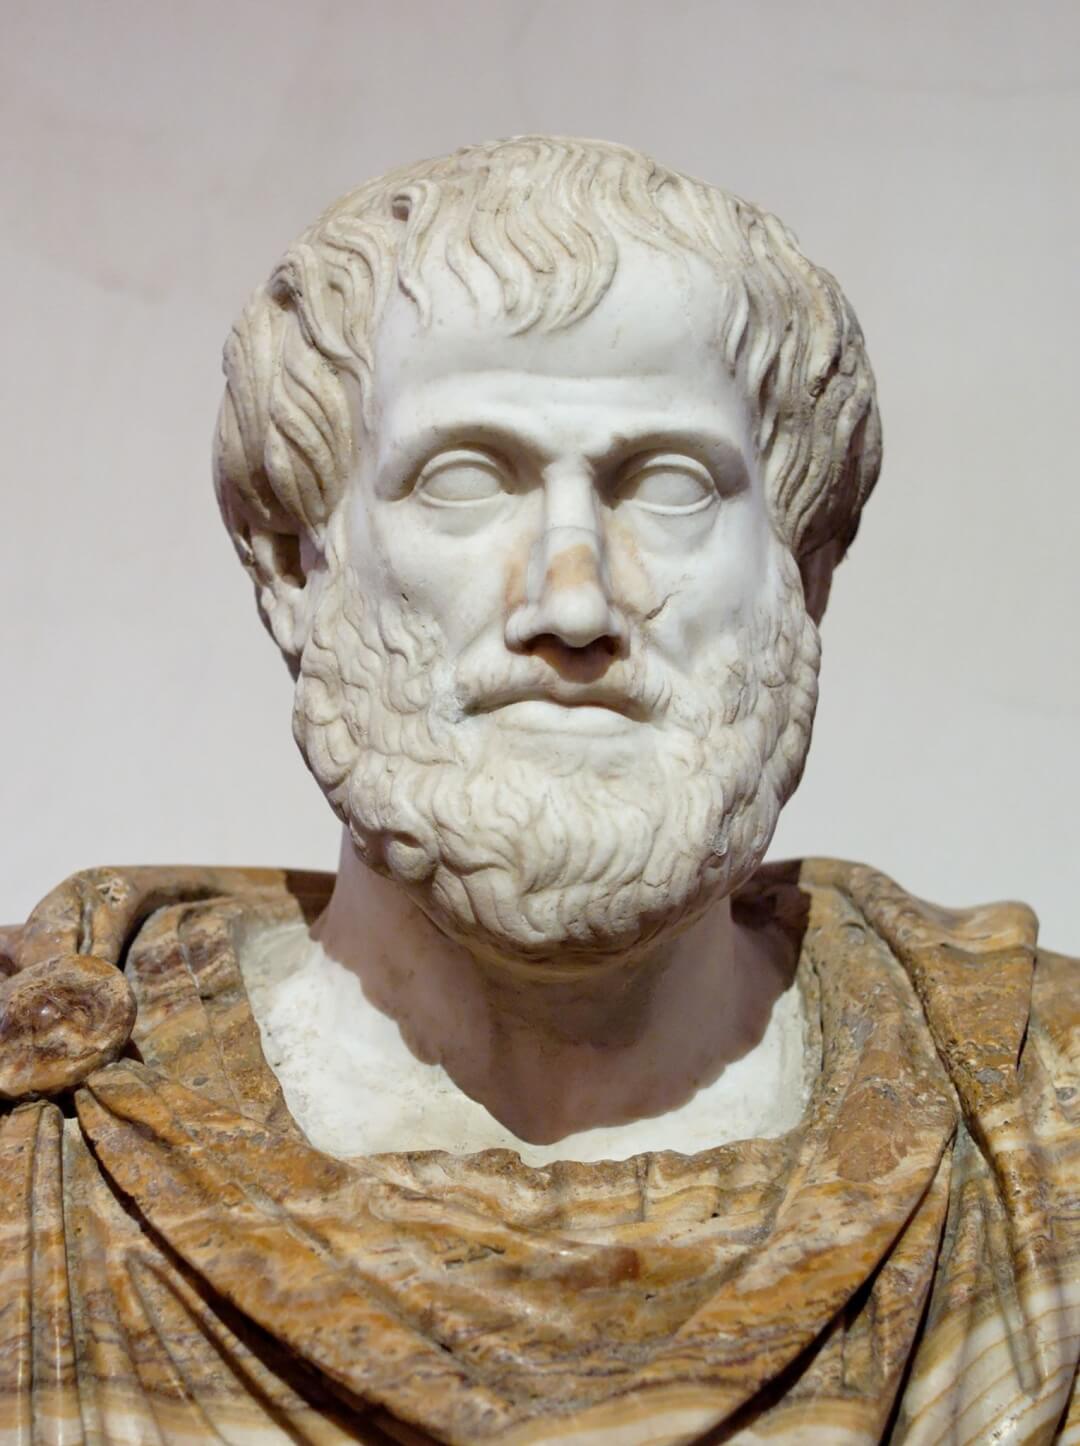 Denying Aristotle wrote about art undermines any theory of art and revolution